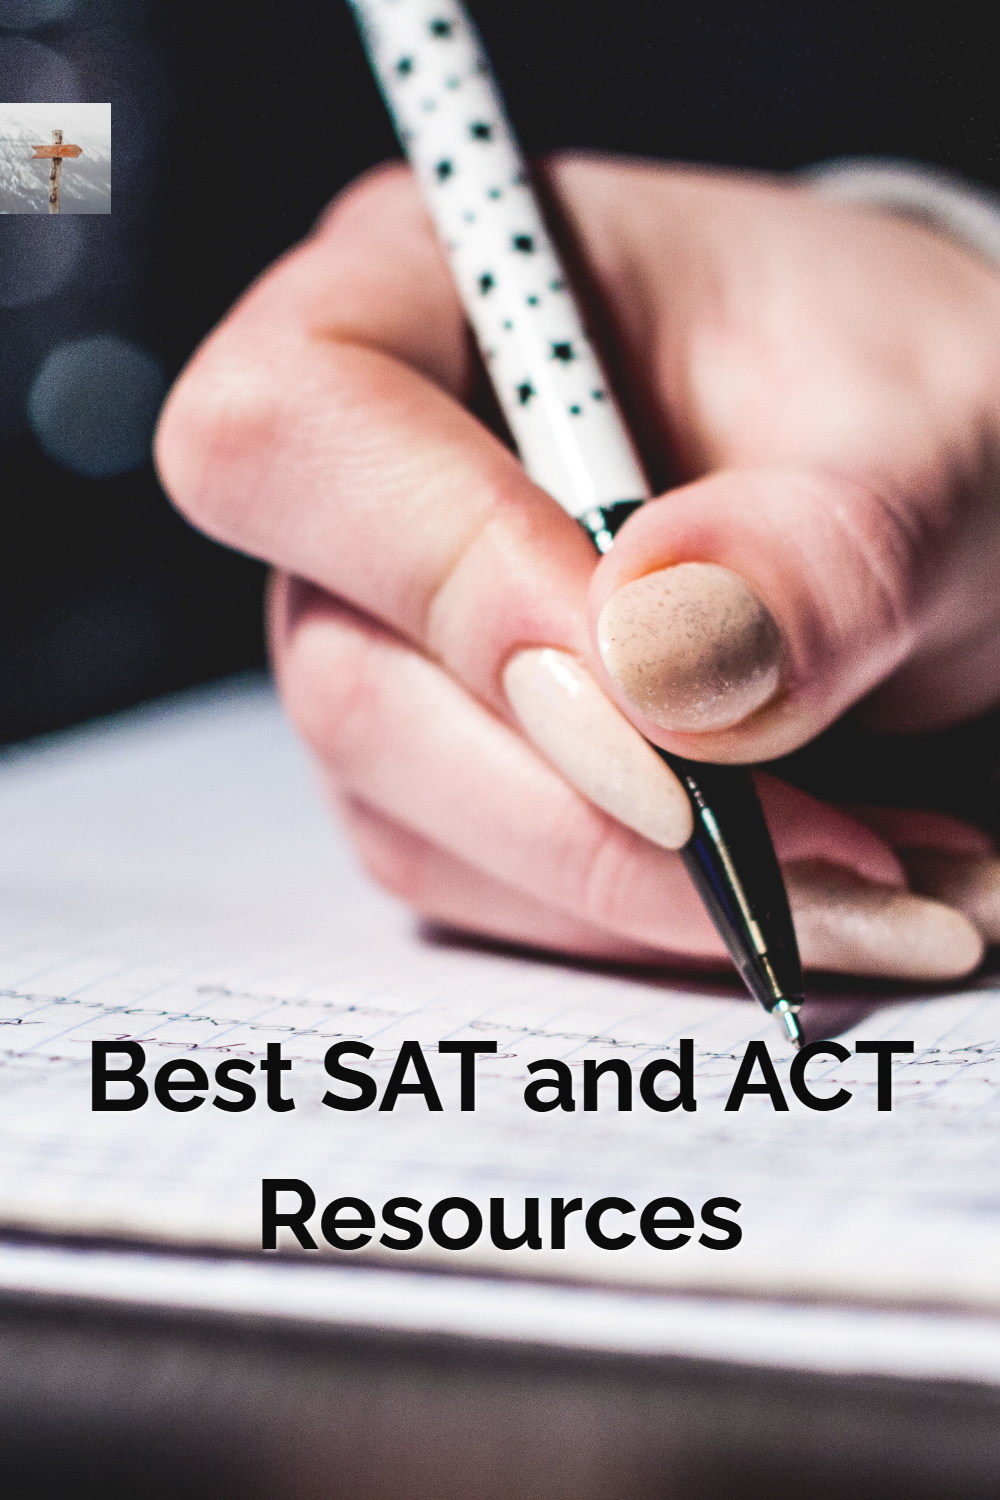 Best Resources for SAT and ACT Prep